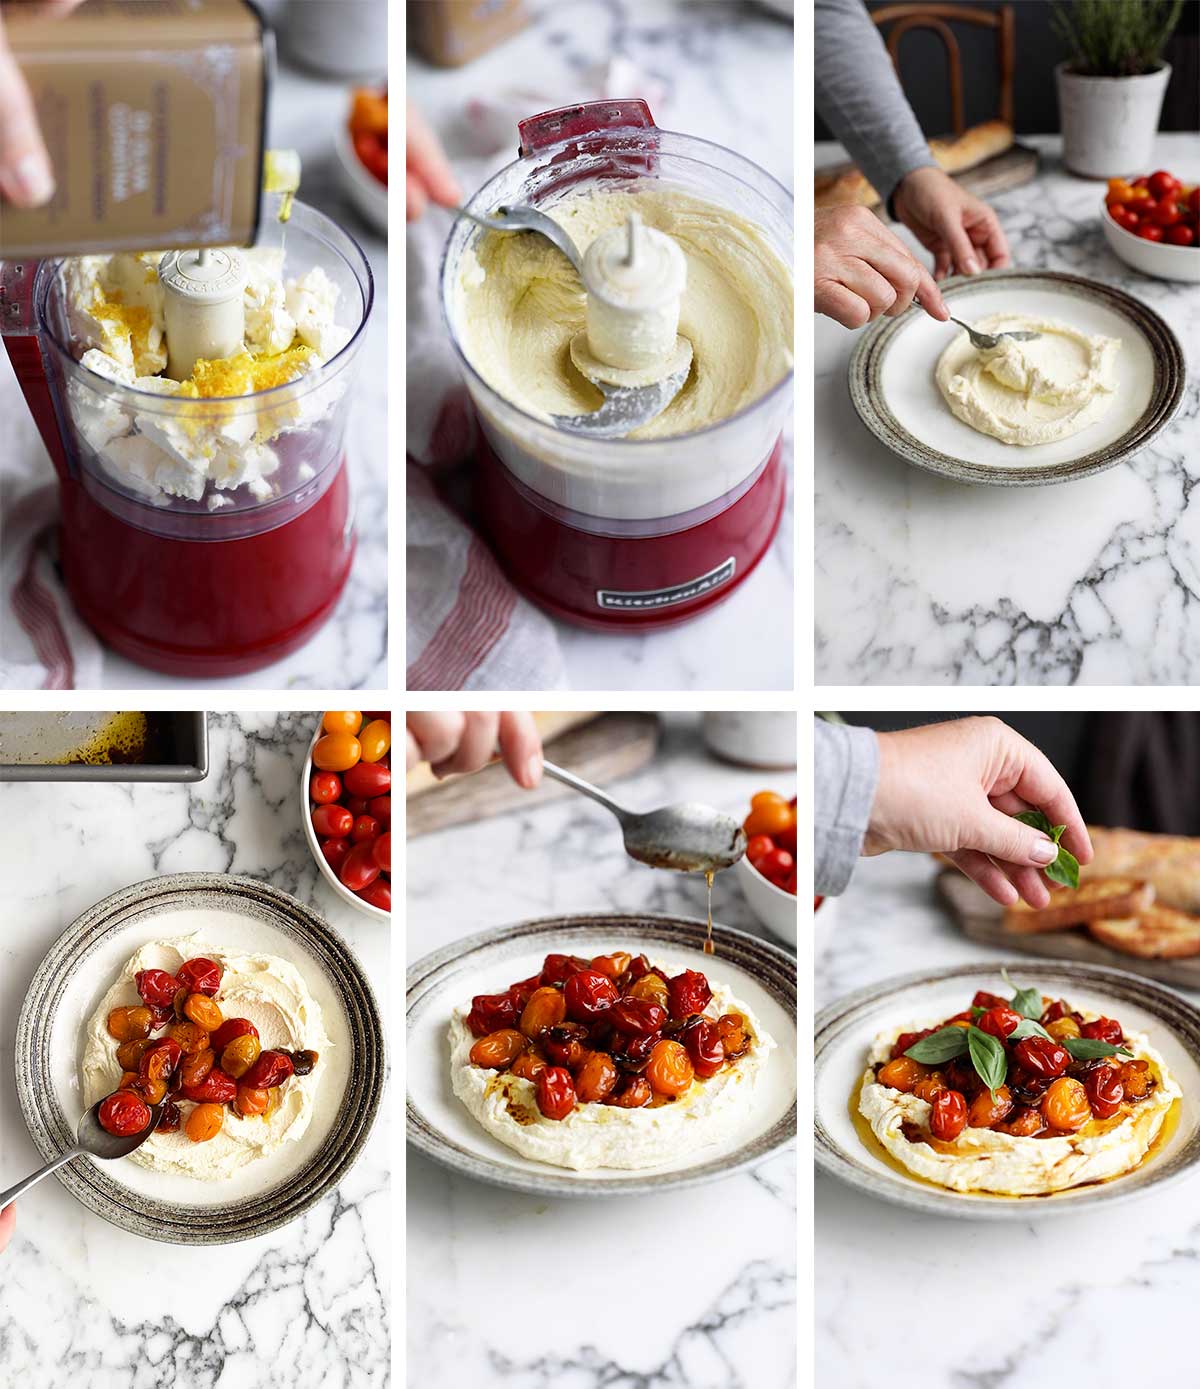 Step by step images of how to make whipped feta with roasted tomatoes and garlic recipe